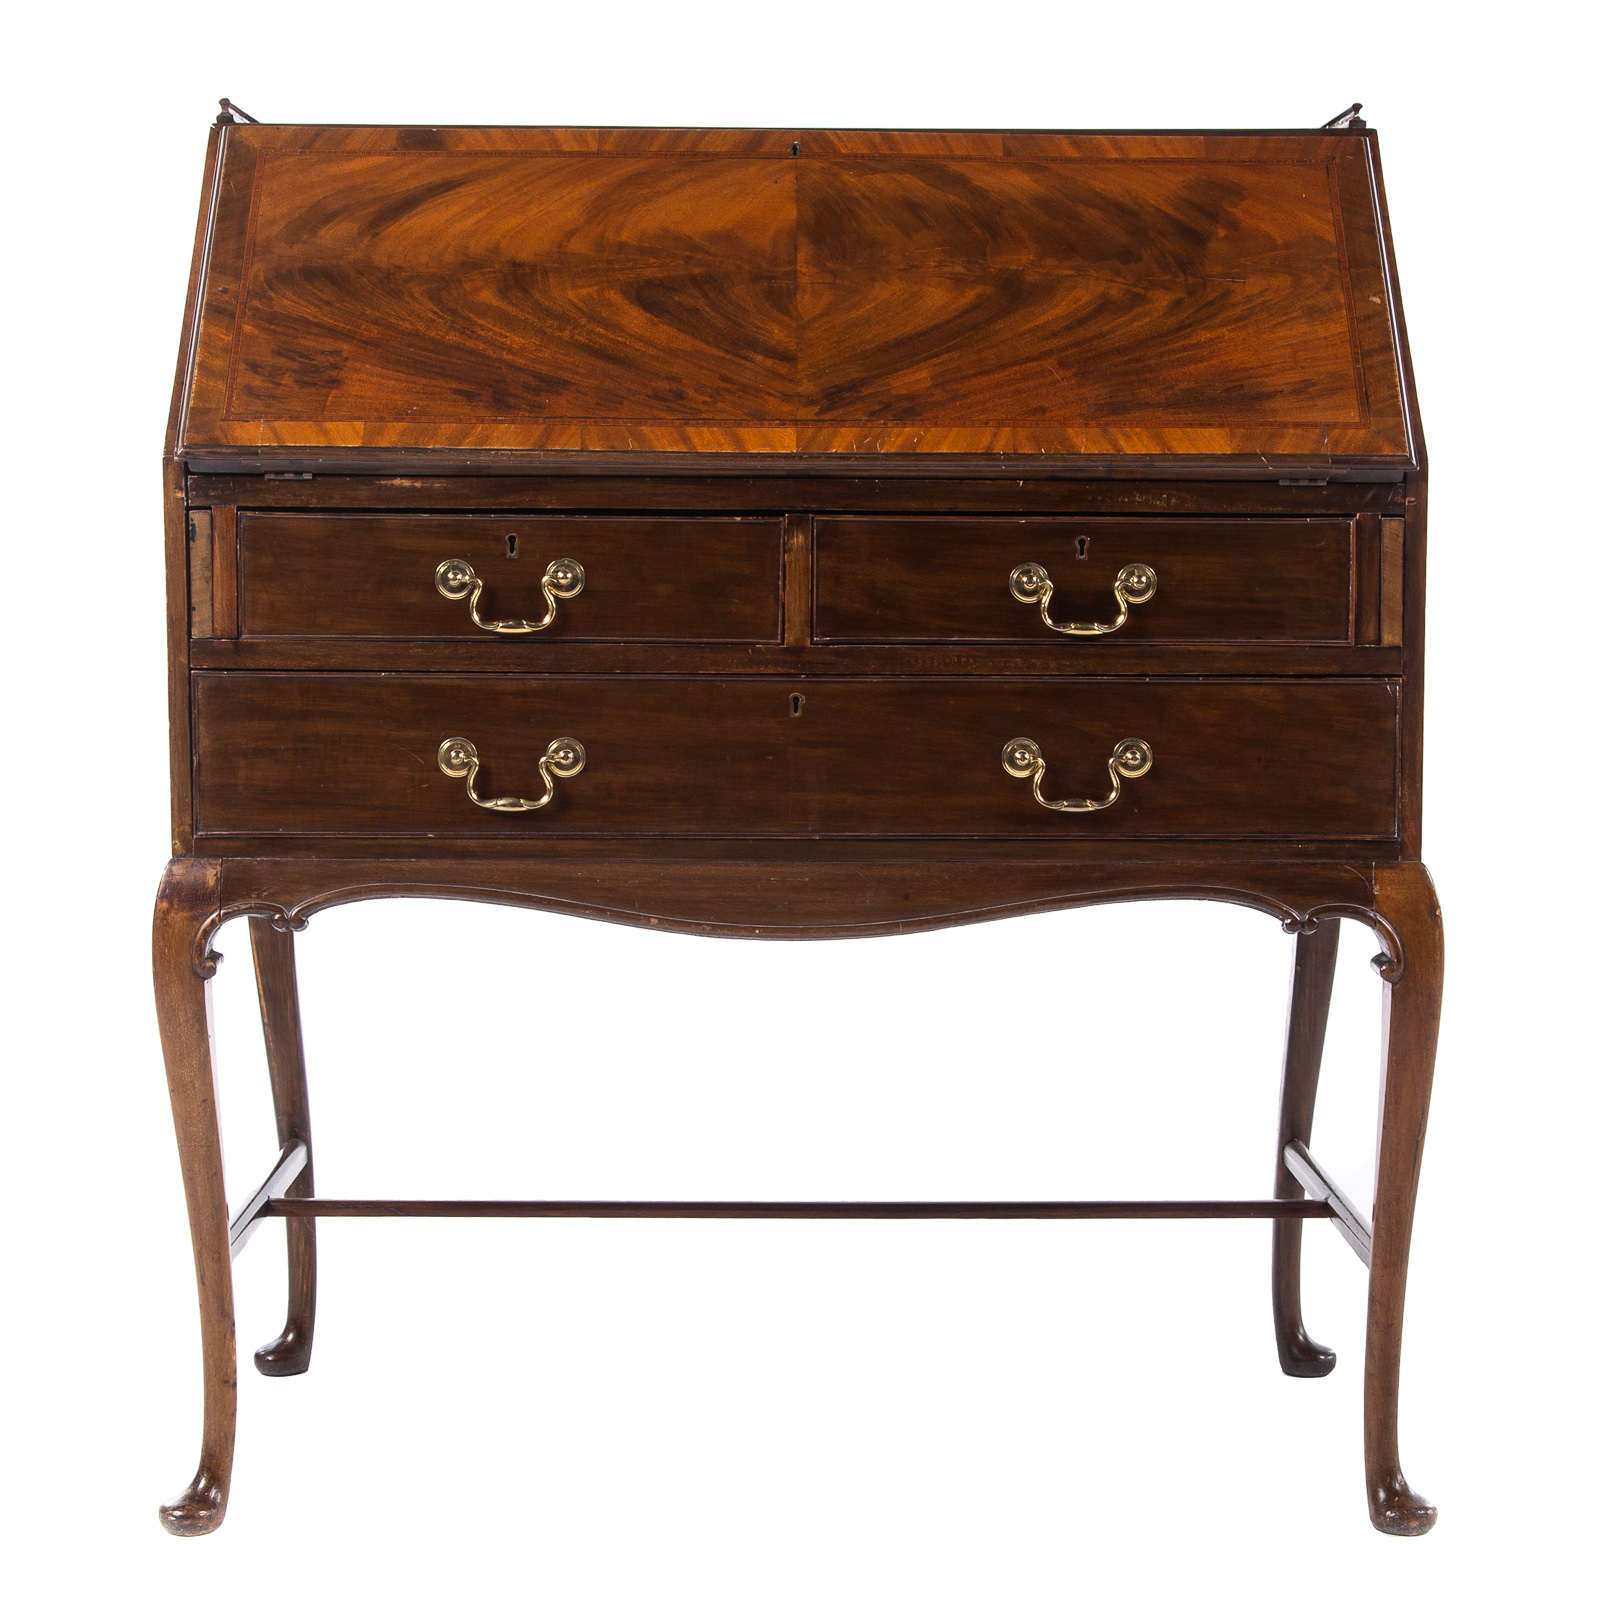 QUEEN ANNE STYLE MAHOGANY SLANT